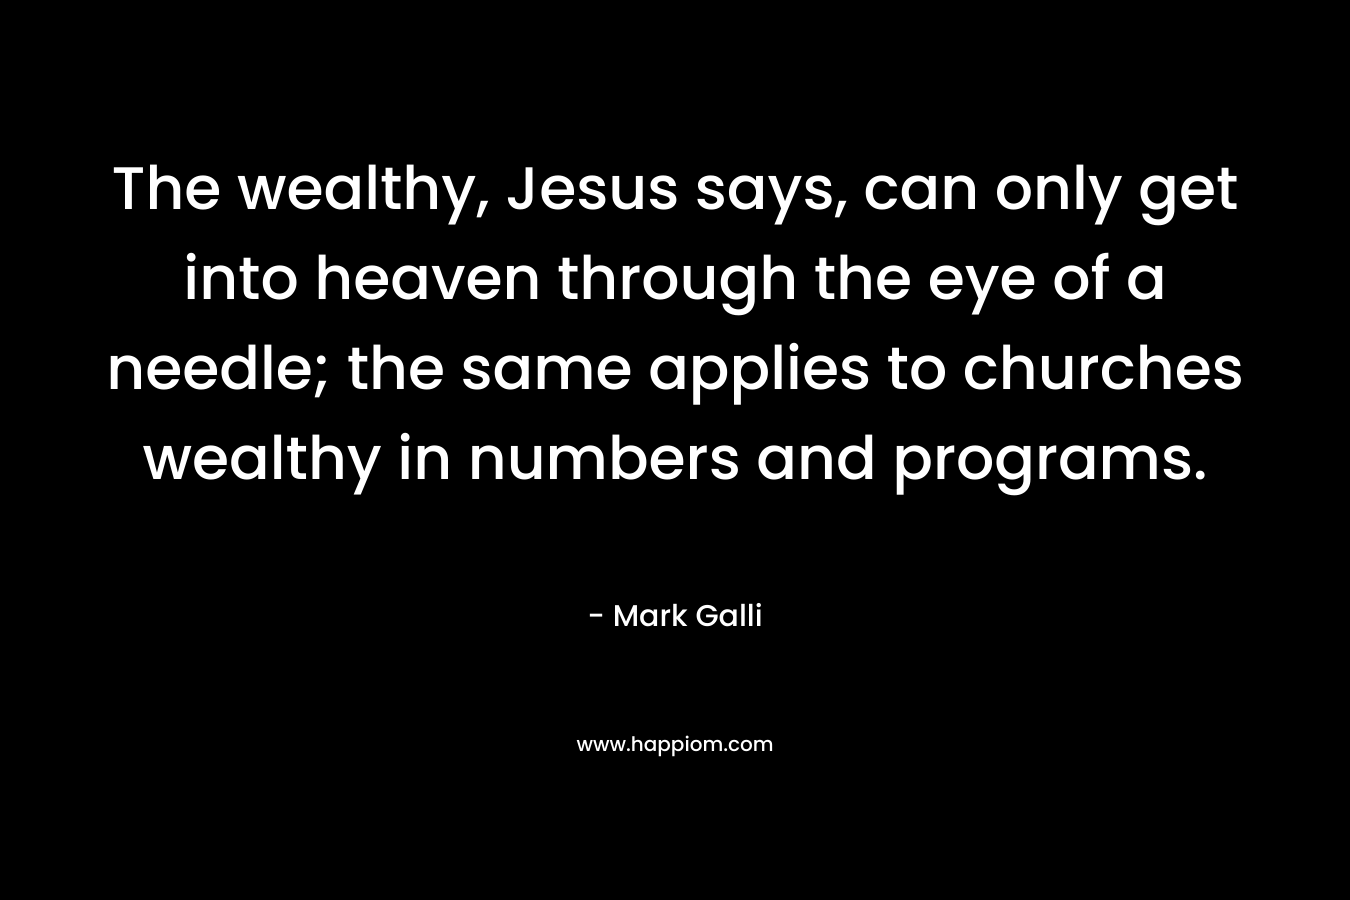 The wealthy, Jesus says, can only get into heaven through the eye of a needle; the same applies to churches wealthy in numbers and programs.